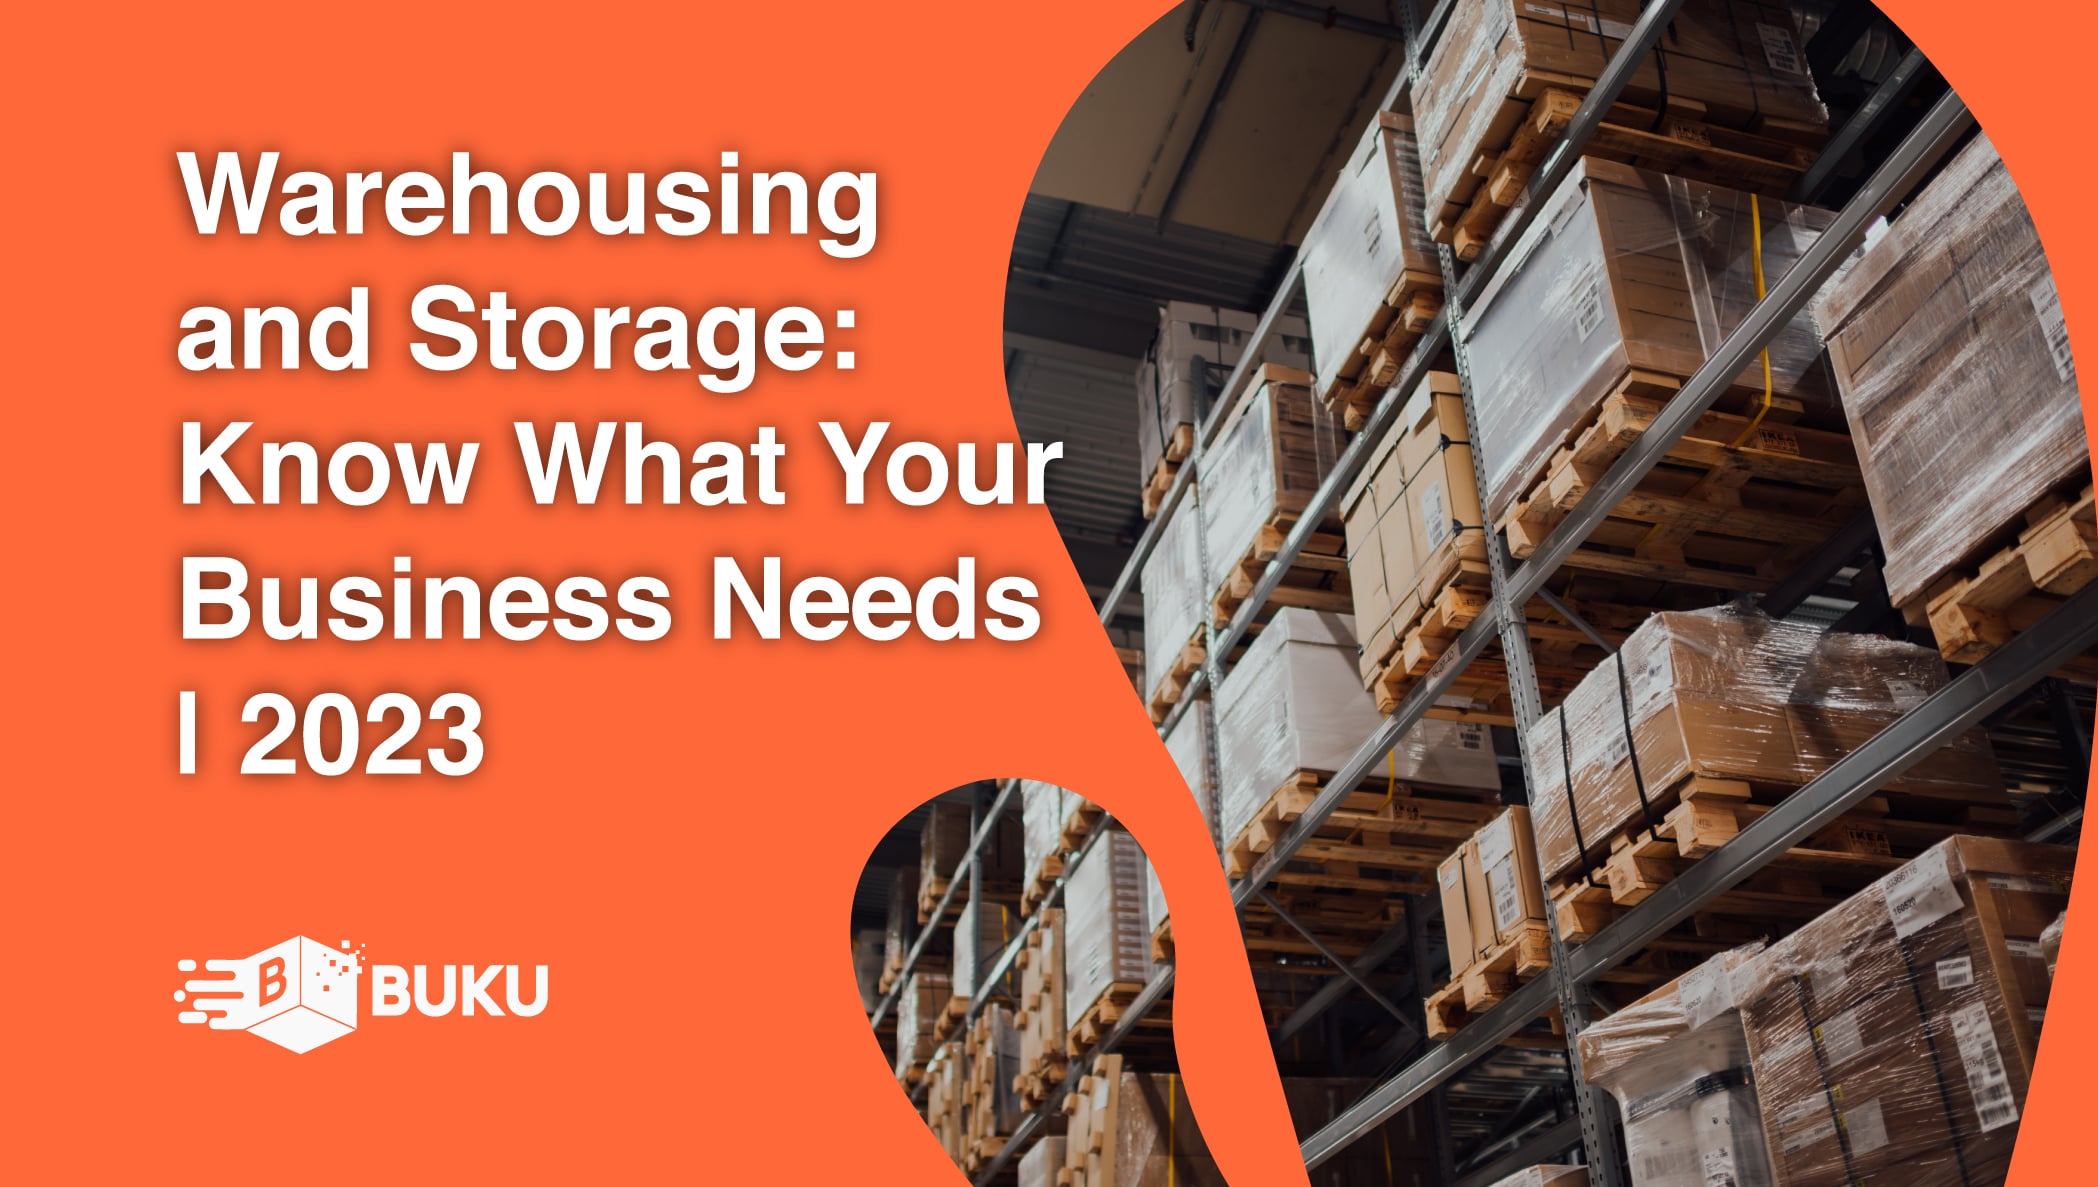 warehousing and storage: know what your business needs title image